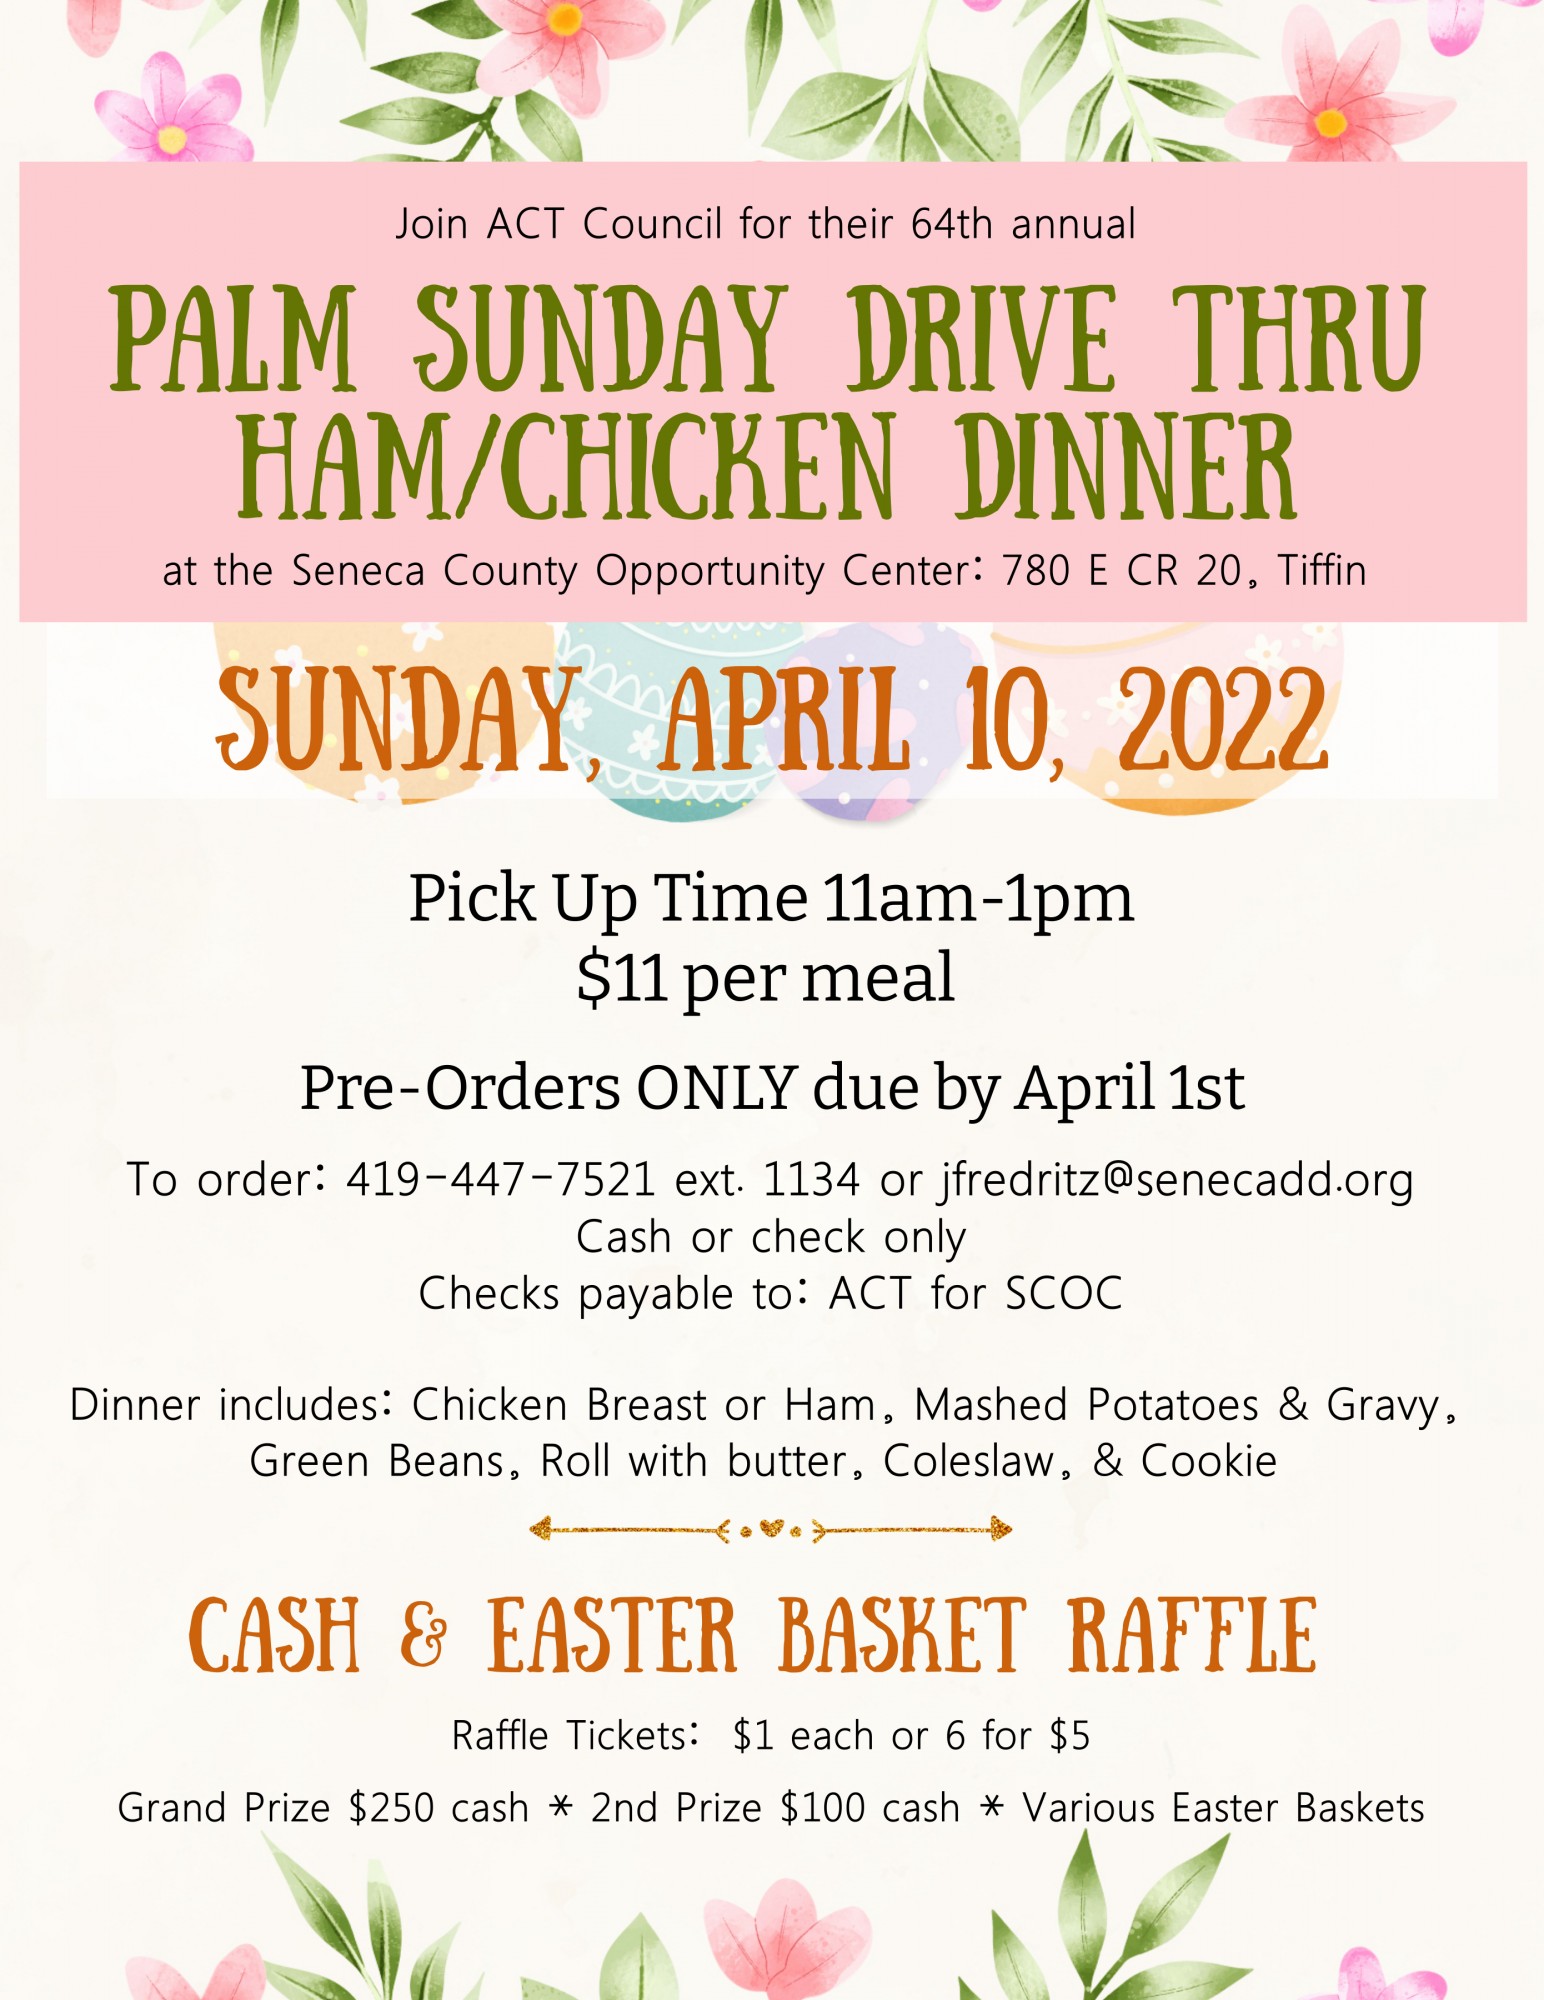 64th Annual Palm Sunday Dinner at the Seneca County Opportunity Center